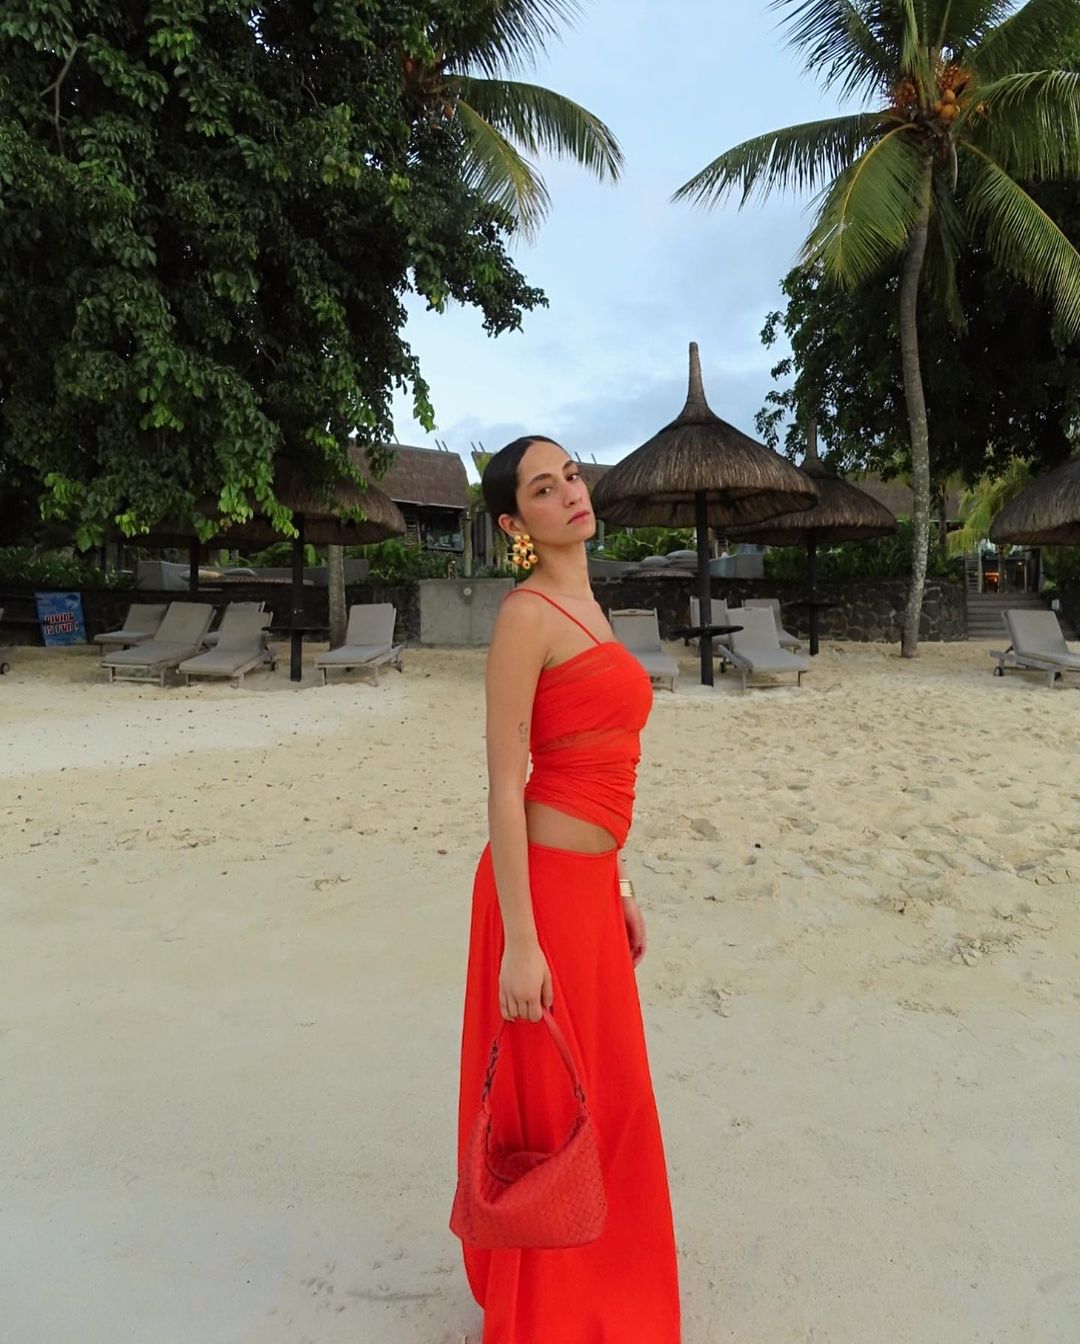 Summer Colour Trends: @emnitta wears a red halter top and skirt